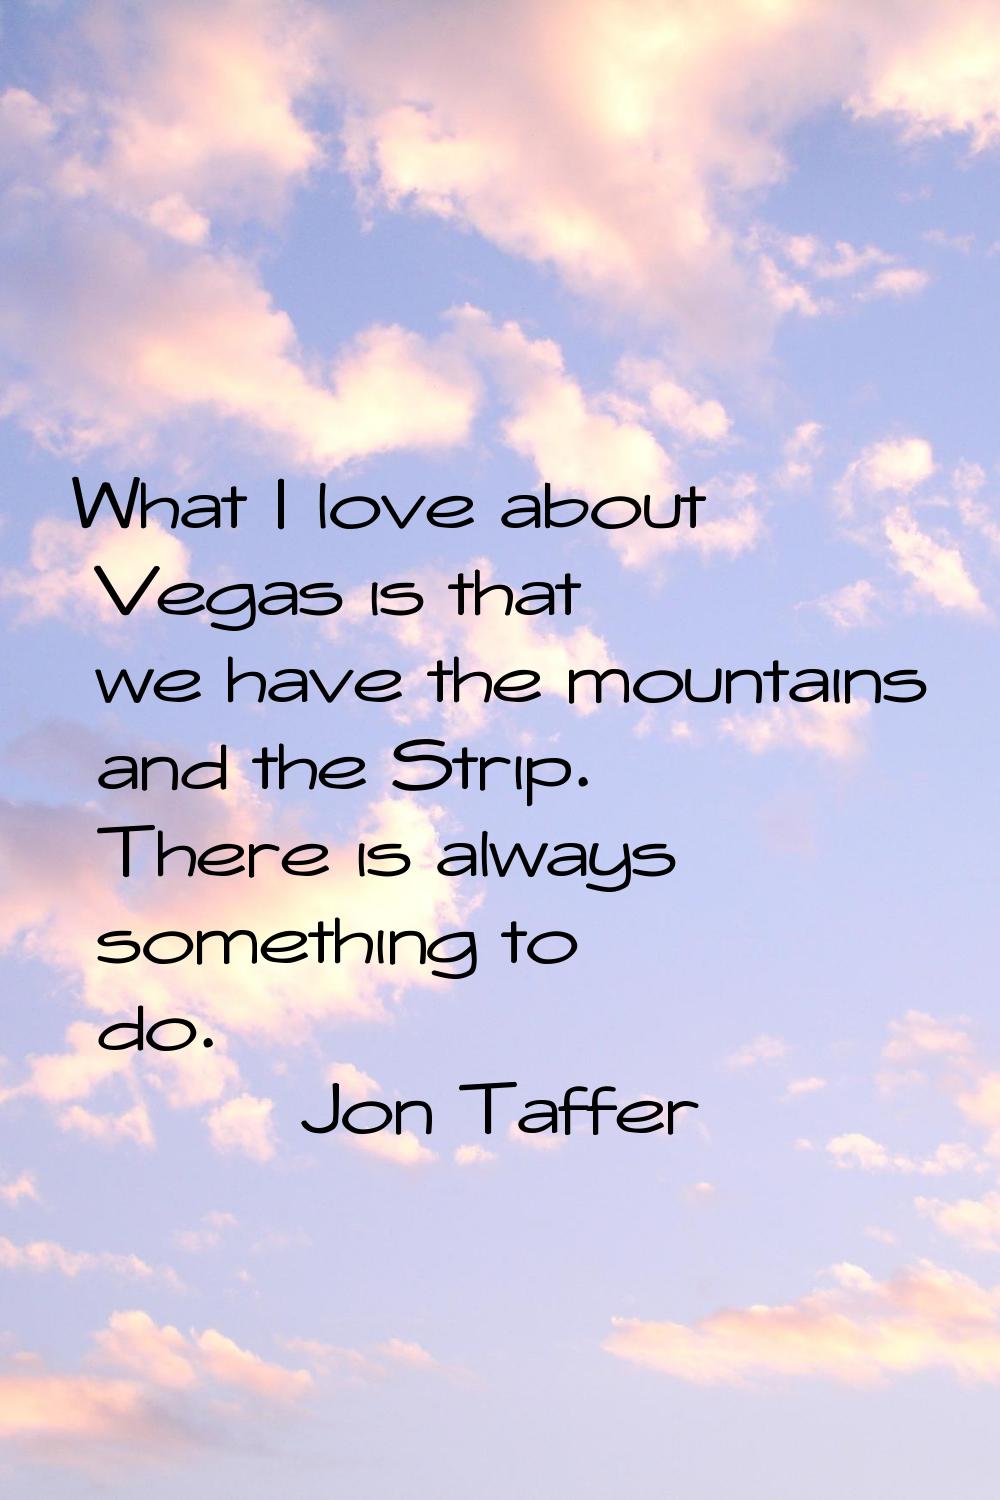 What I love about Vegas is that we have the mountains and the Strip. There is always something to d